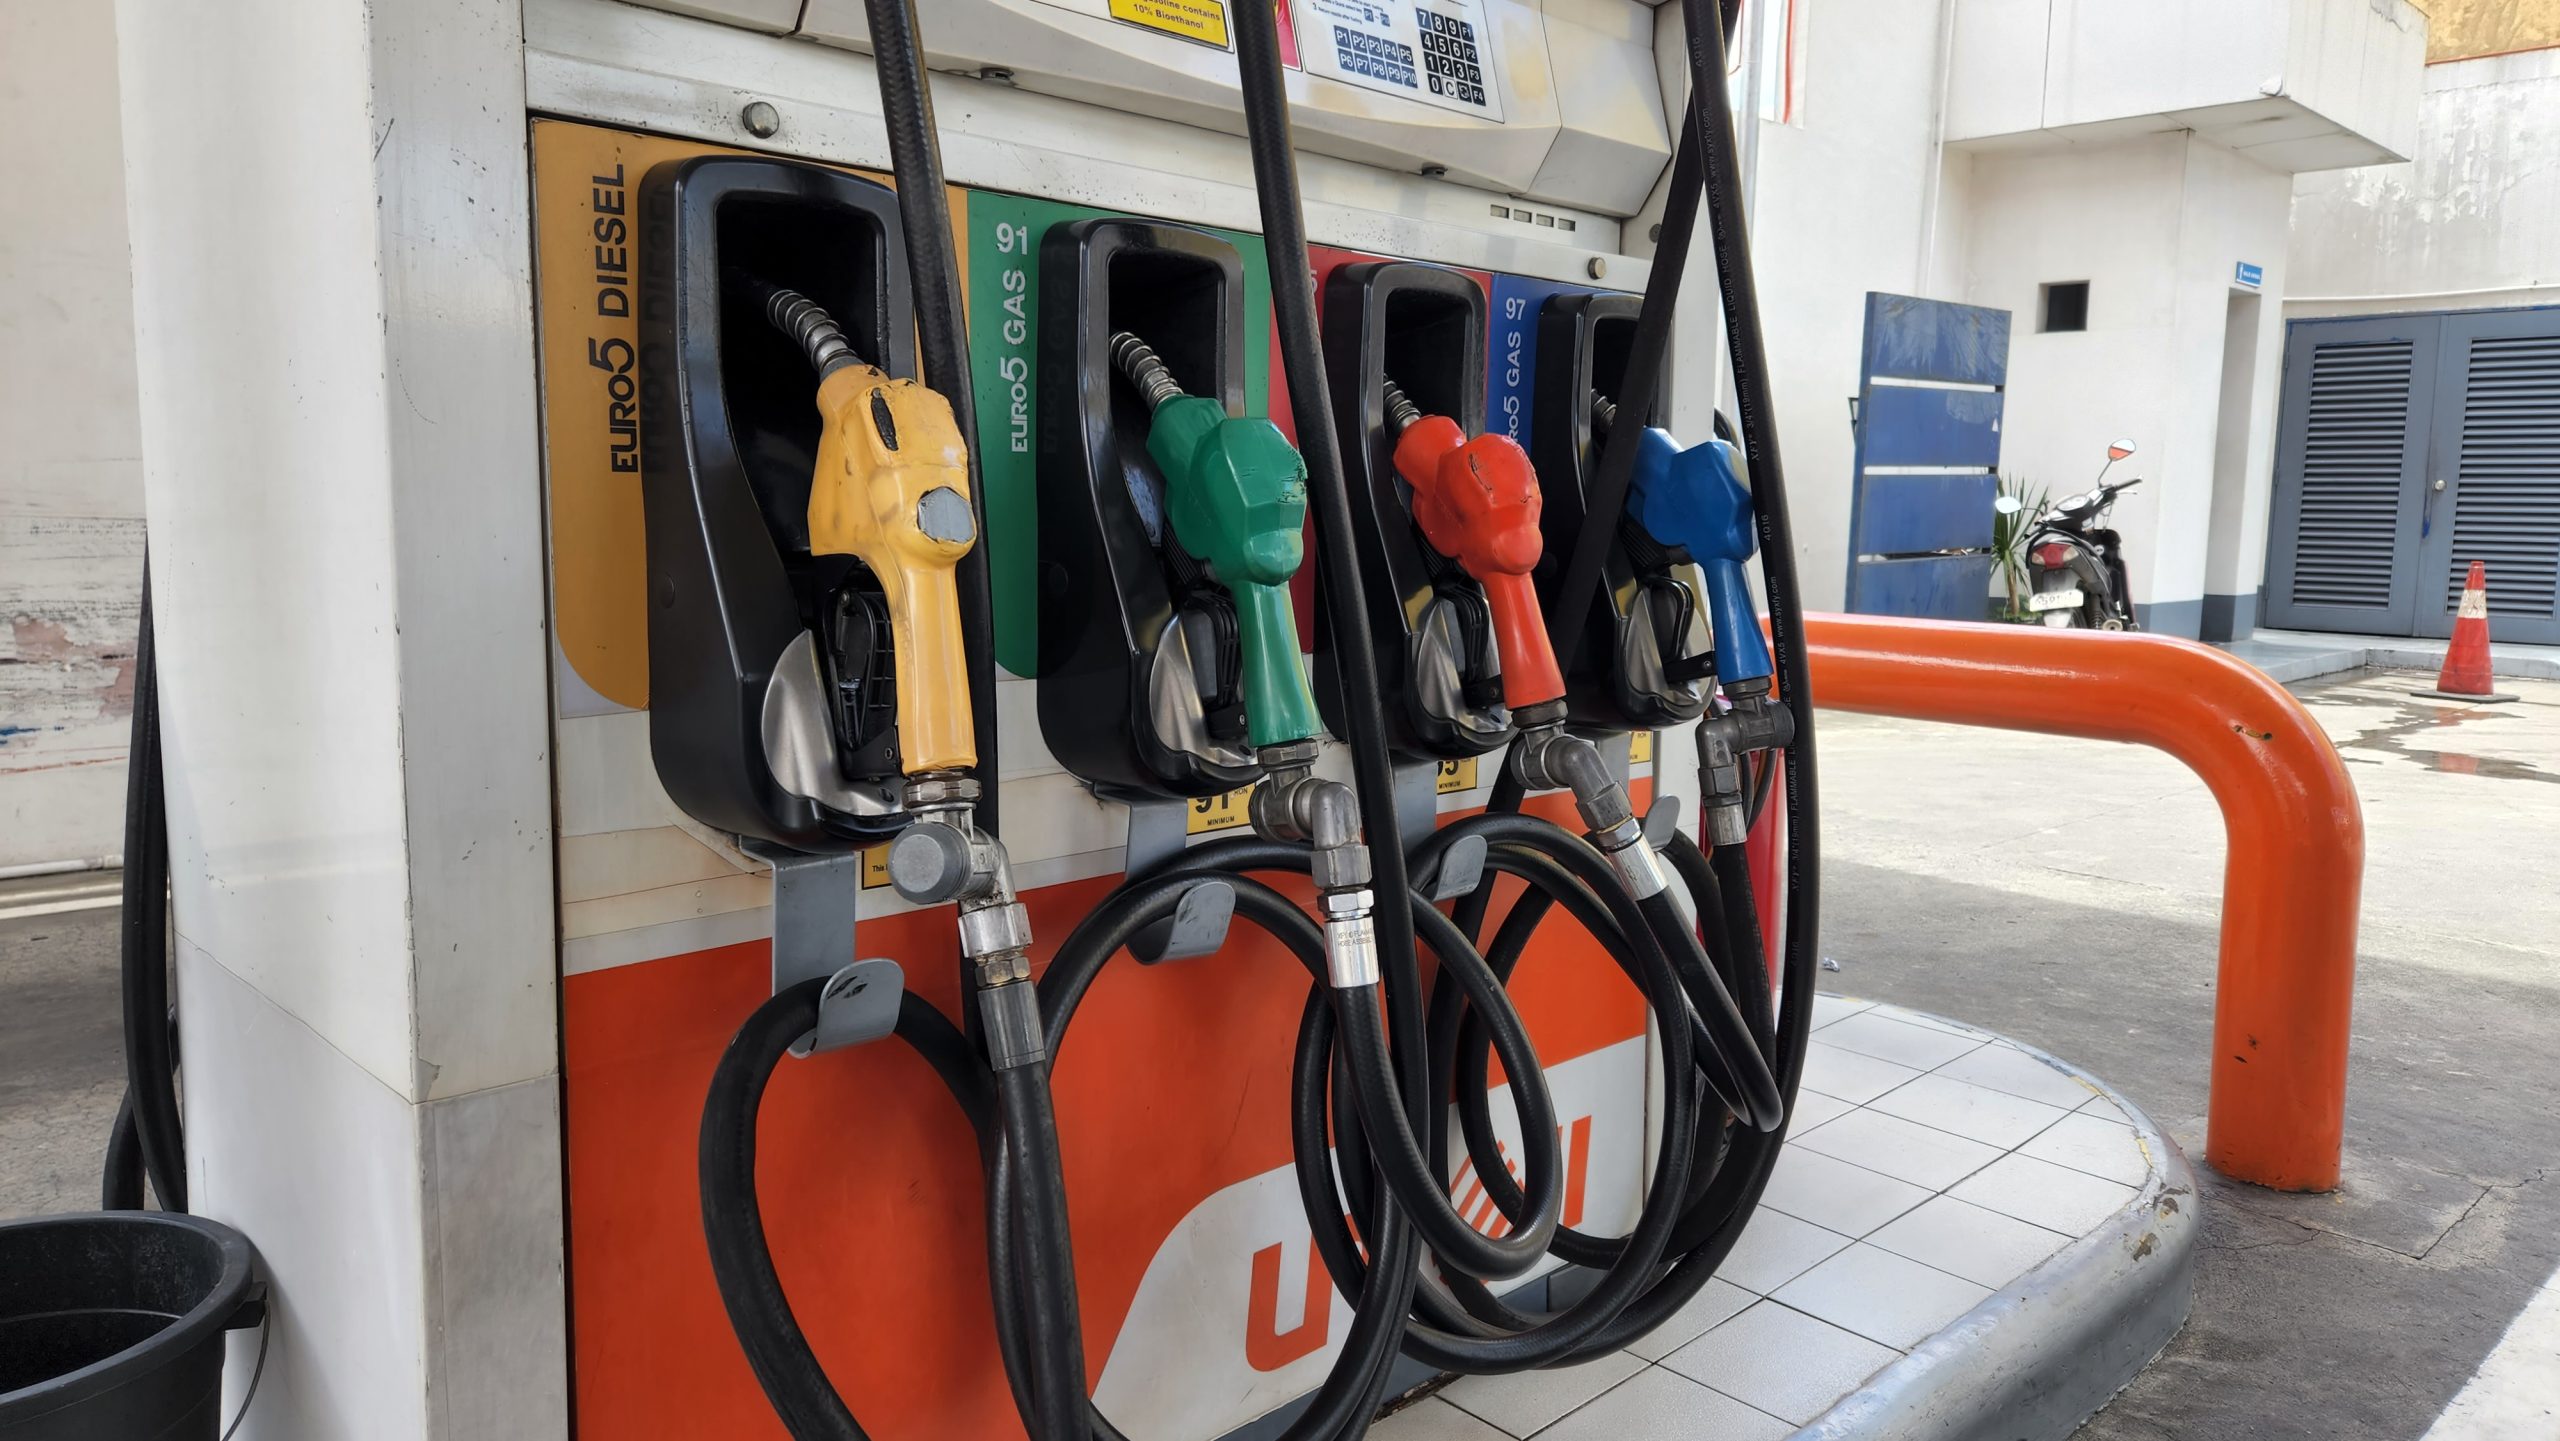 Fuel price increase October 18, 2022: Diesel to go up by 2.70 Gasoline by 0.80